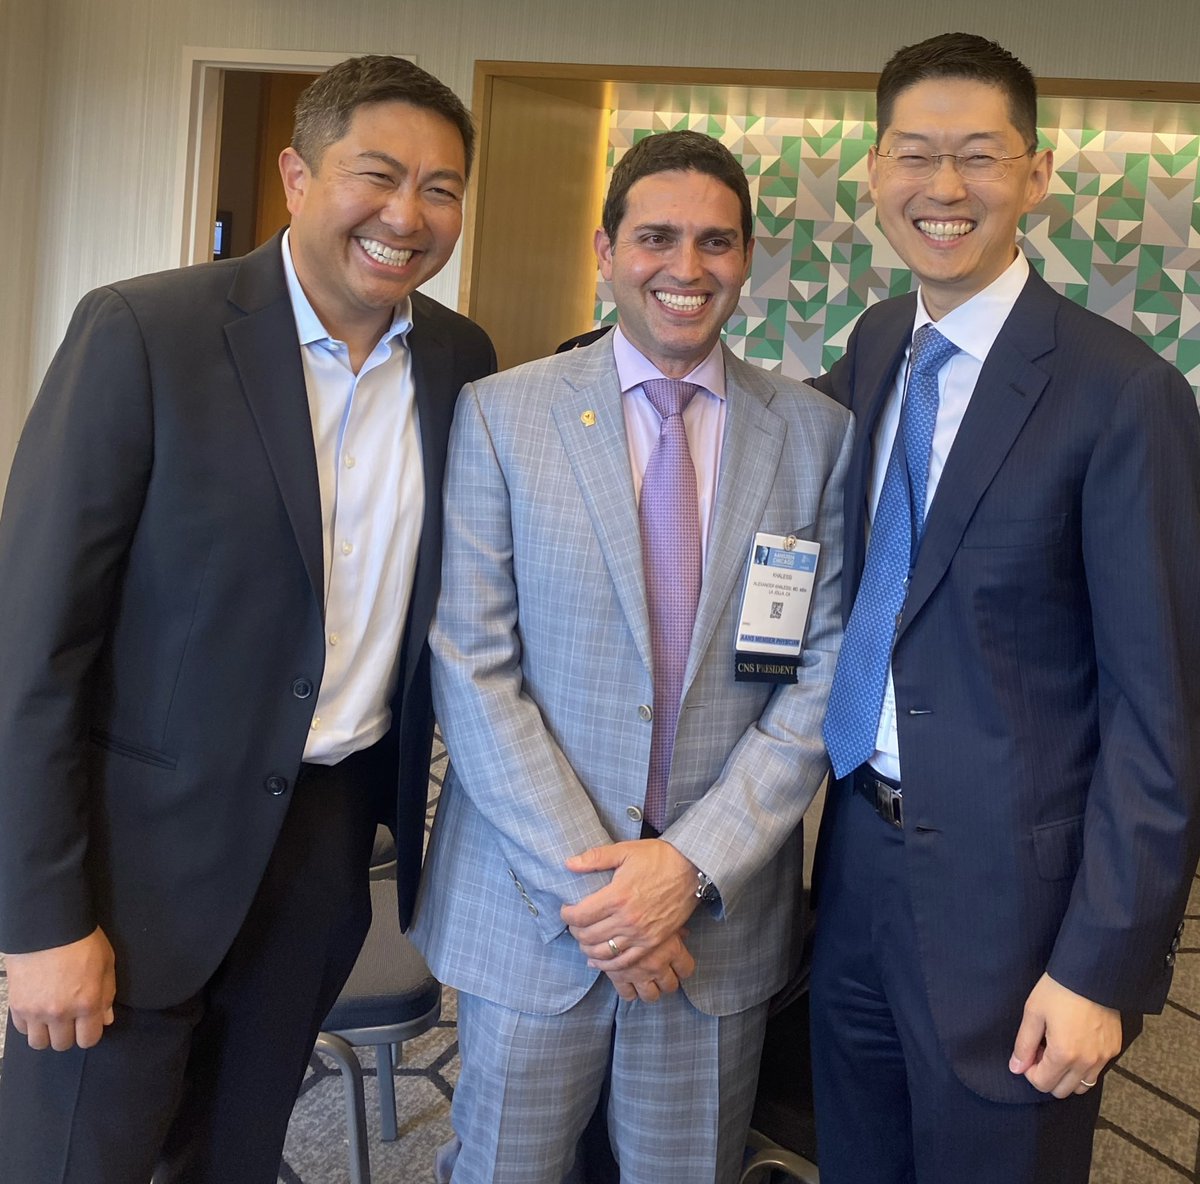 Great to meet Dr. Lim @MichaelLimMD and Dr. Khalessi @DrAlexKhalessi at #AANS2024 ! @UCSDNeuroSurg @StanfordNsurg @CNS_Update @IsaacYangMD @UCLANsgy @AANSNeuro #CNS